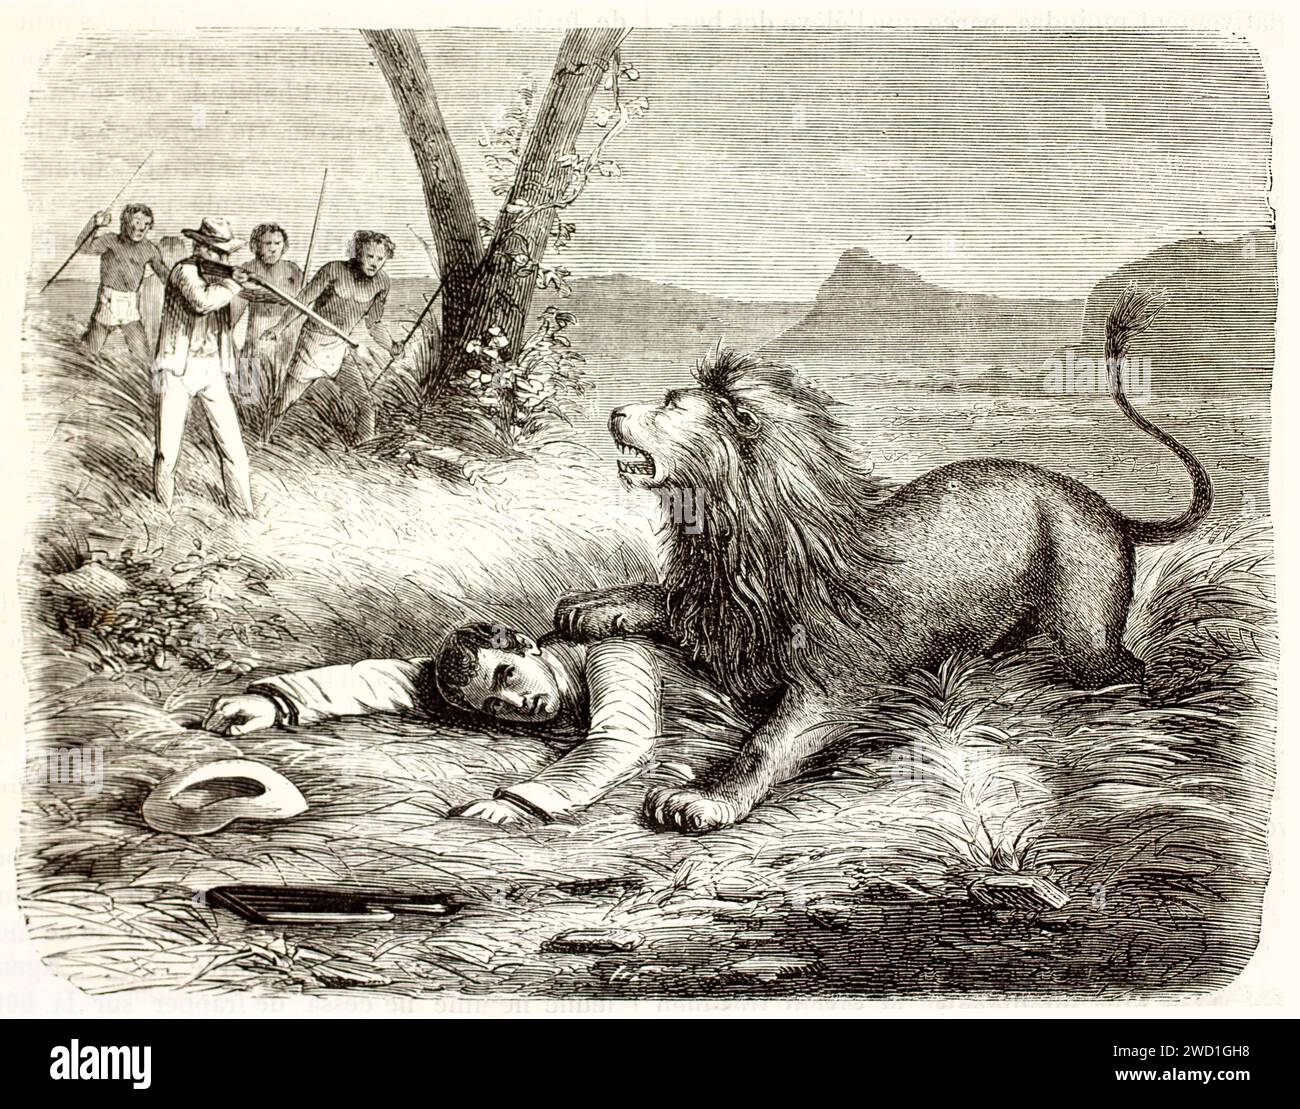 Old illustration depicting Lion attacking man. Created by Burck and Seguin, published on Brehm, Les Mammifers, Baillière et fils, Paris, 1878 Stock Photo